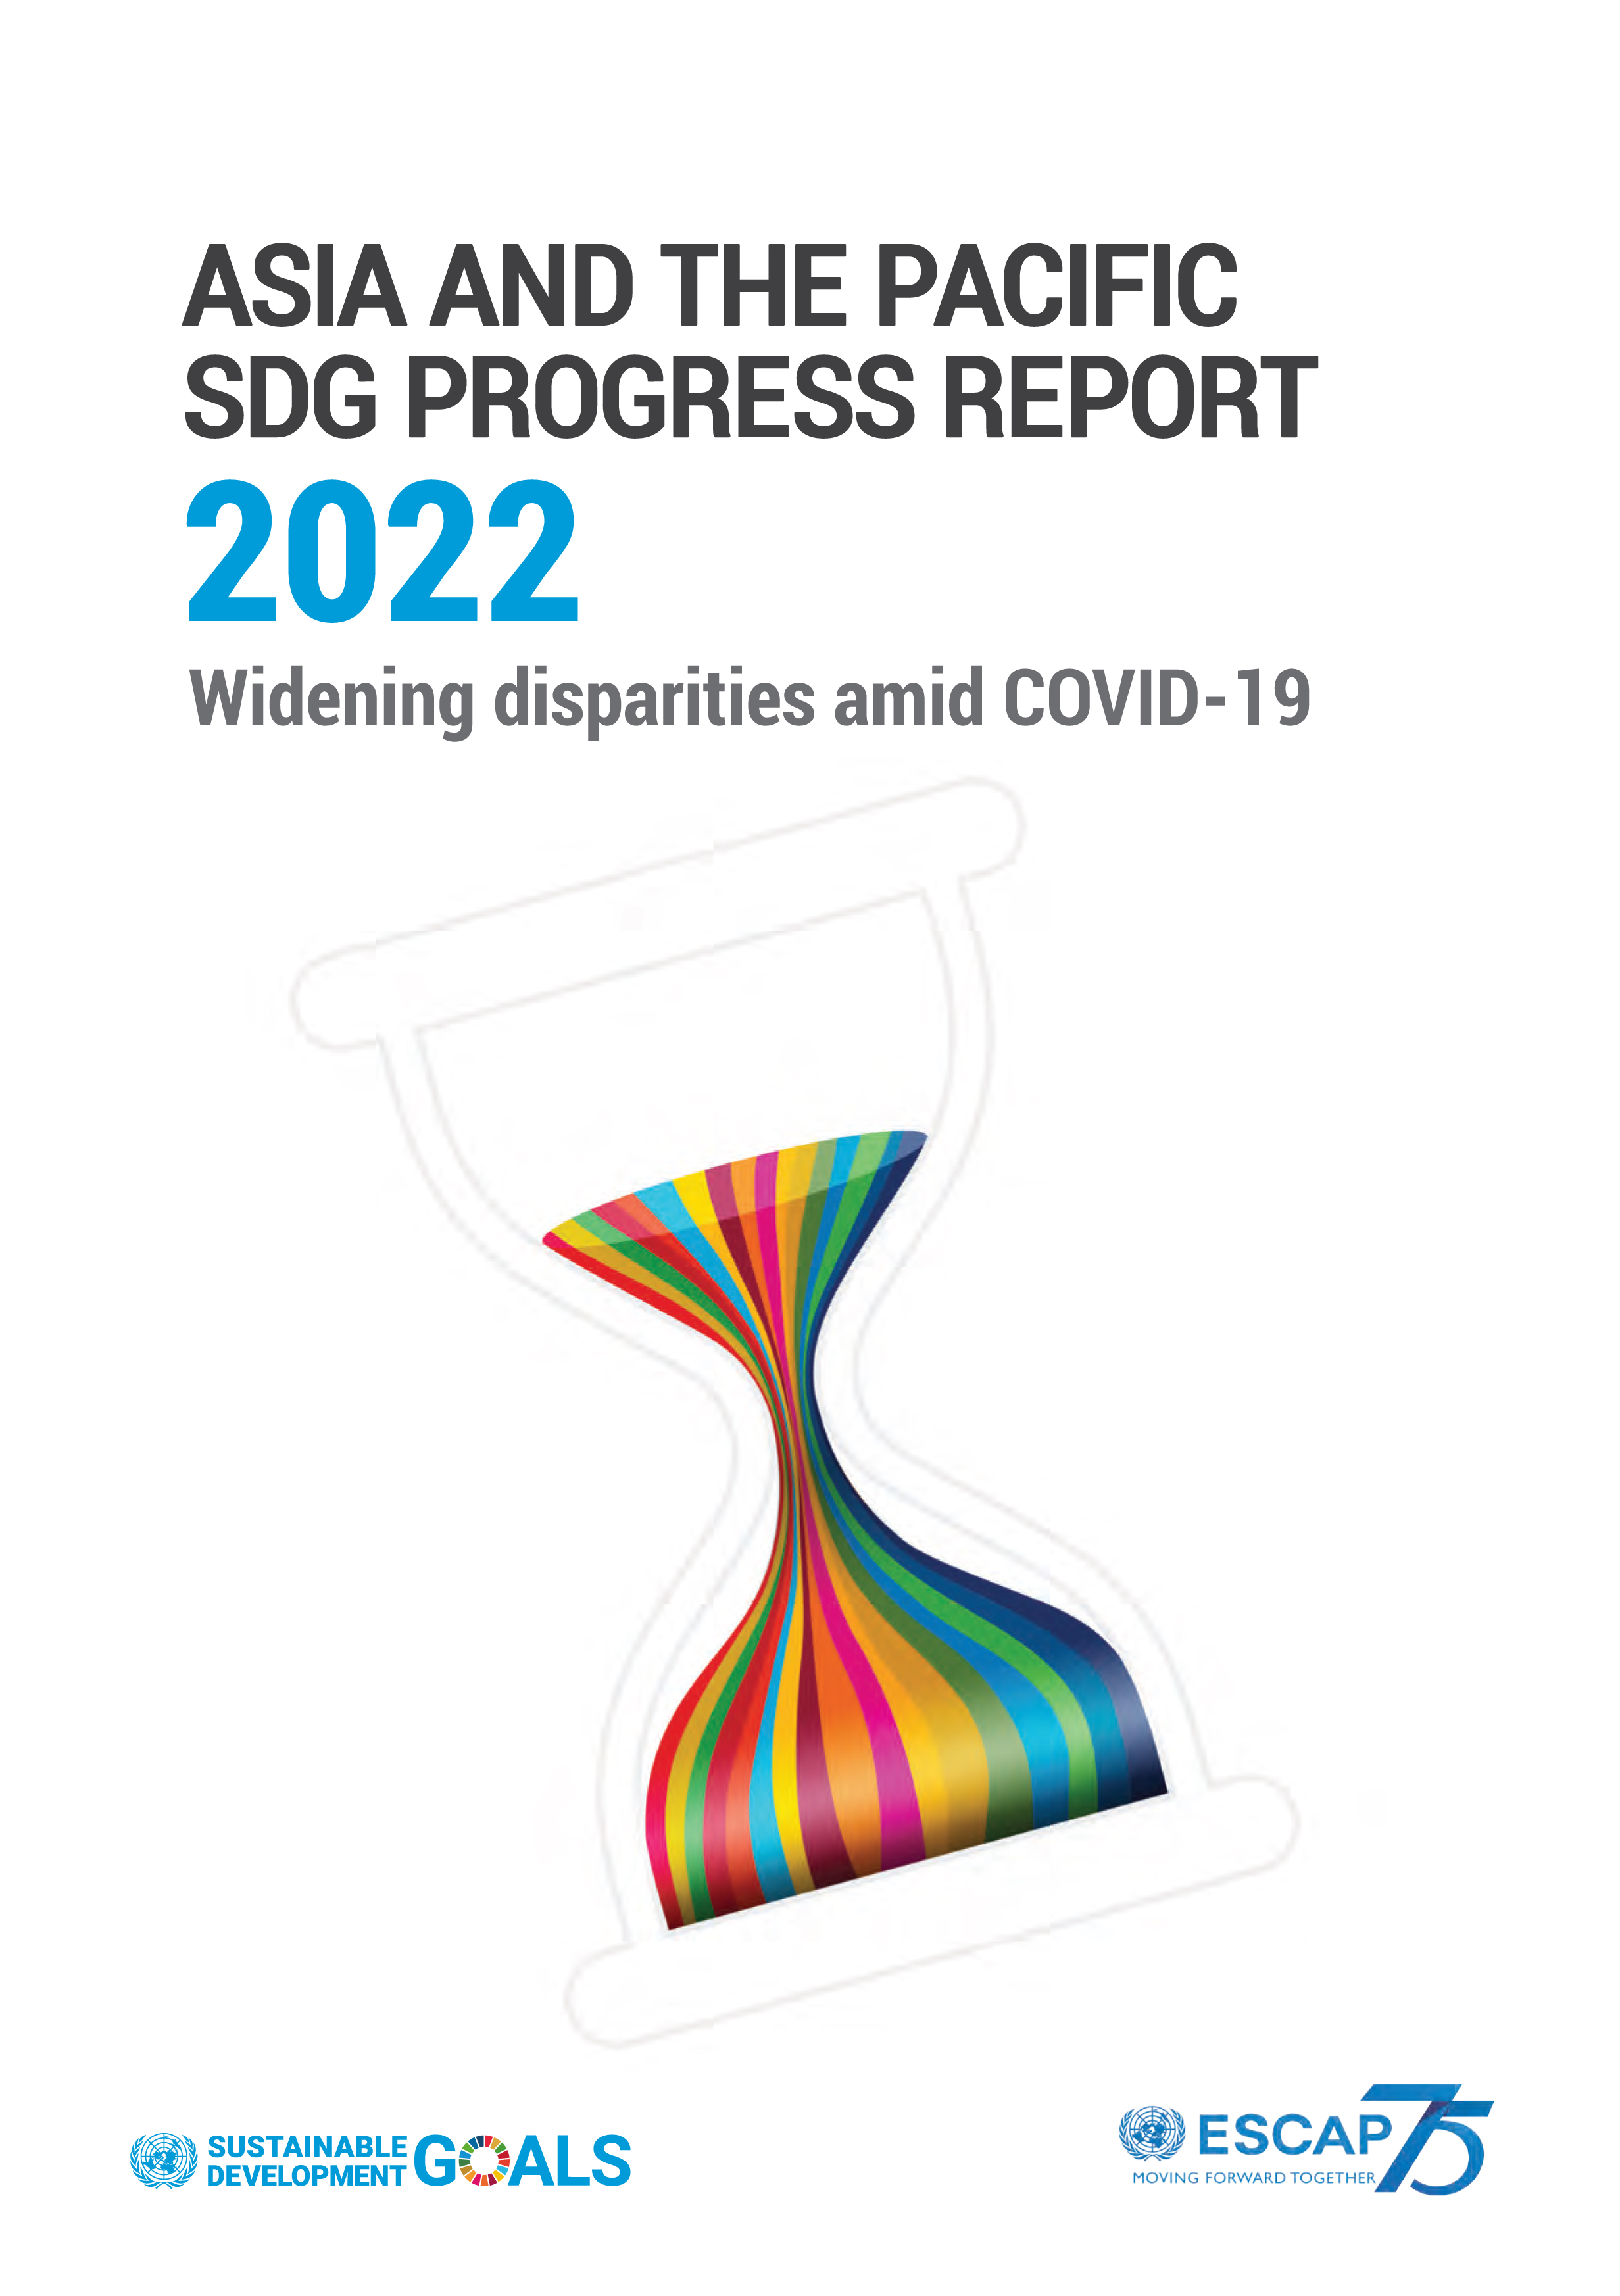 Asia and the Pacific SDG Progress Report 2022